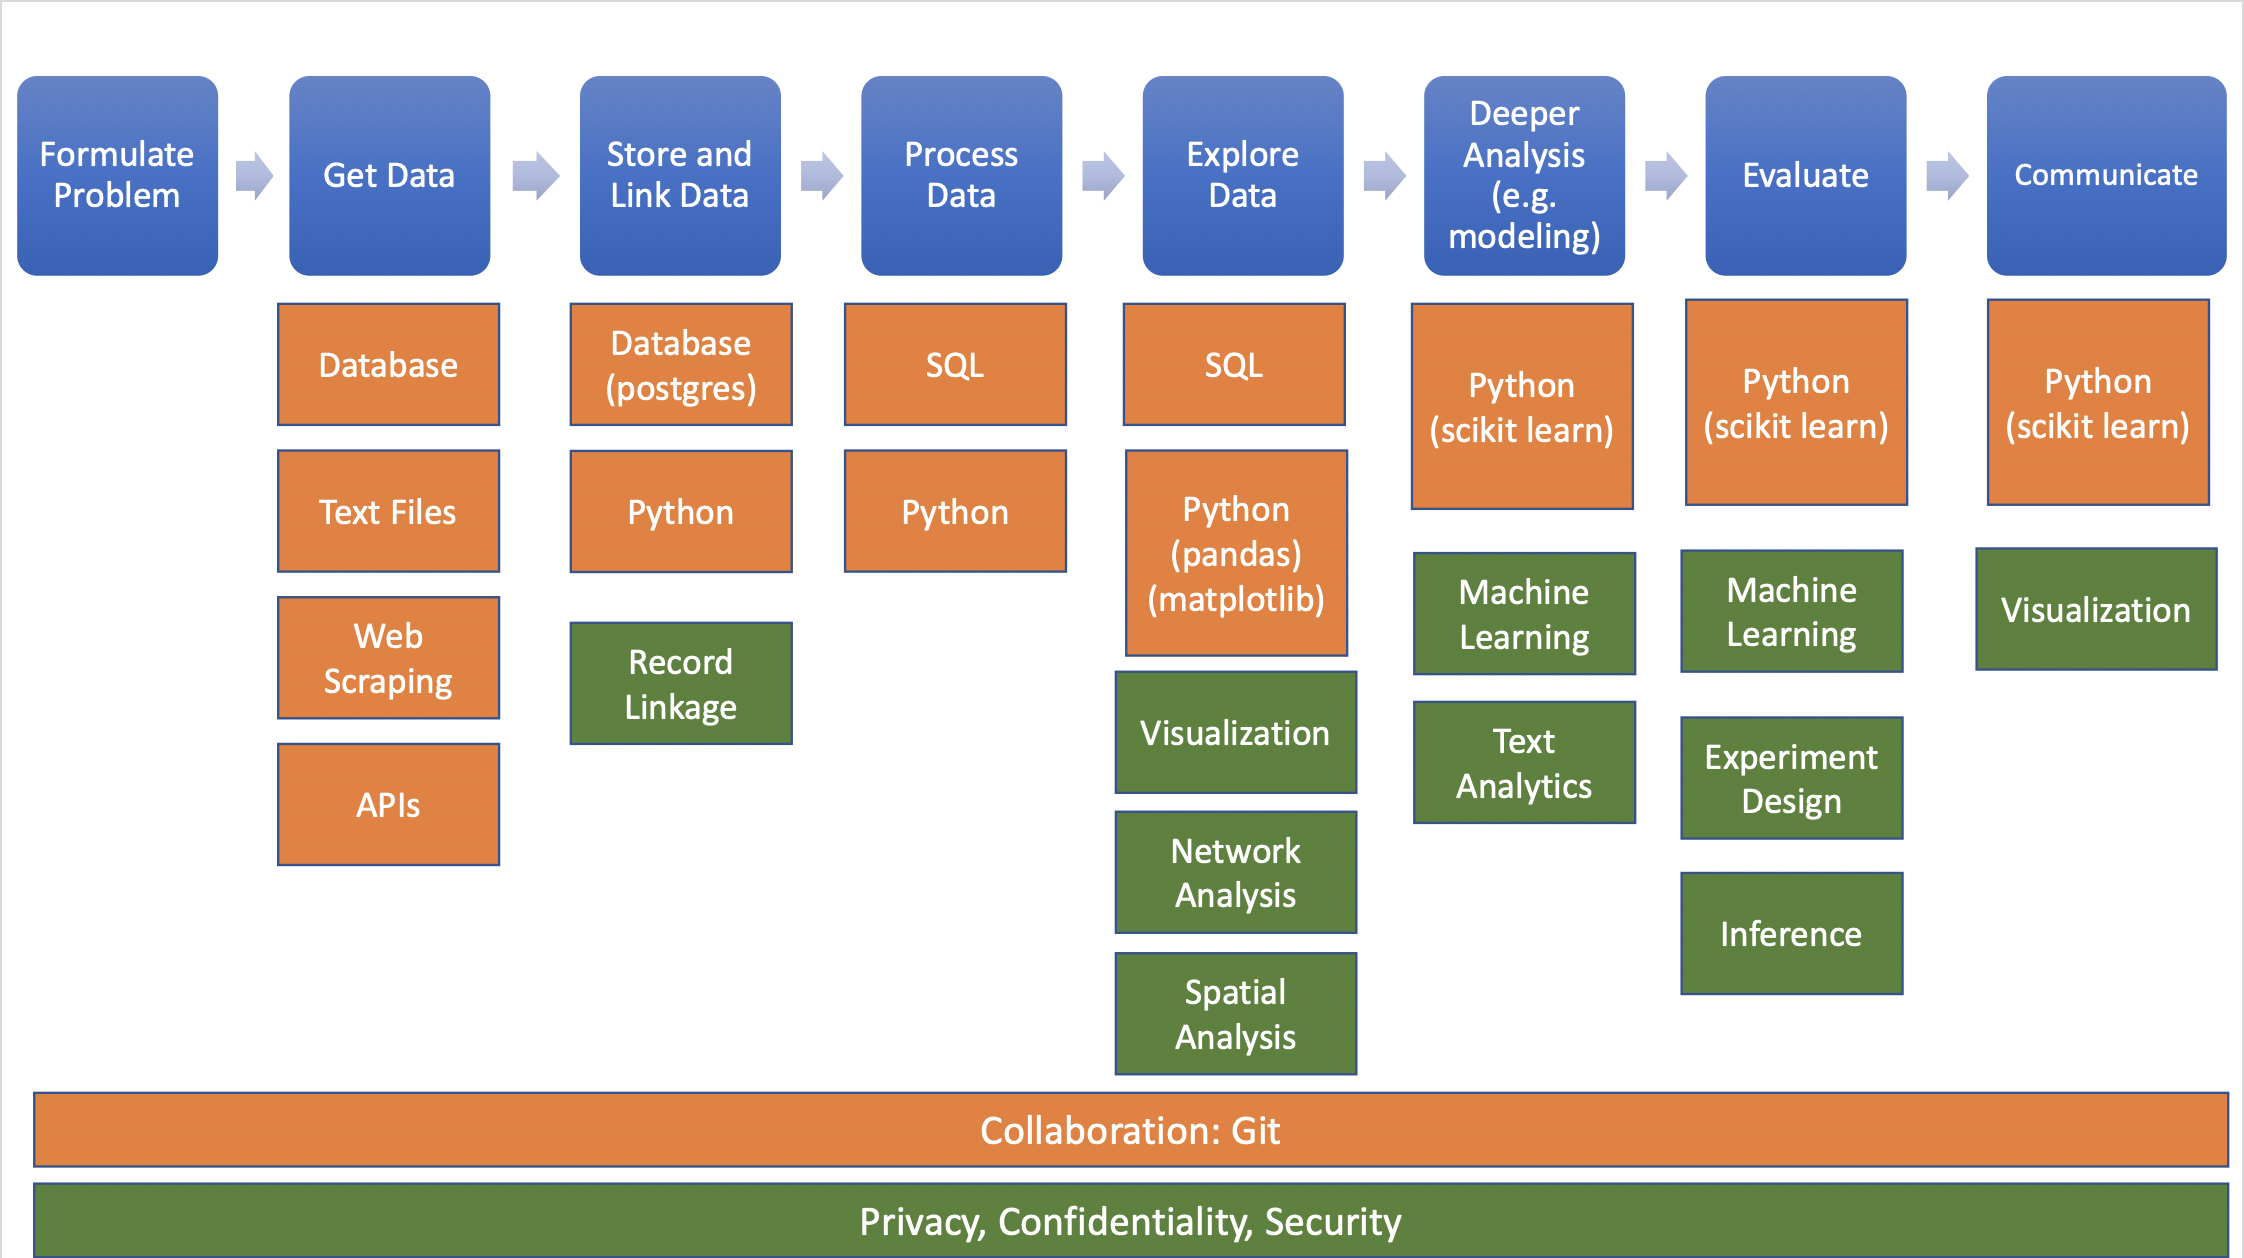 The data science project workflow. Blue represents each step in the project, orange represents the tools used in that step, and green represents the methods for analysis.